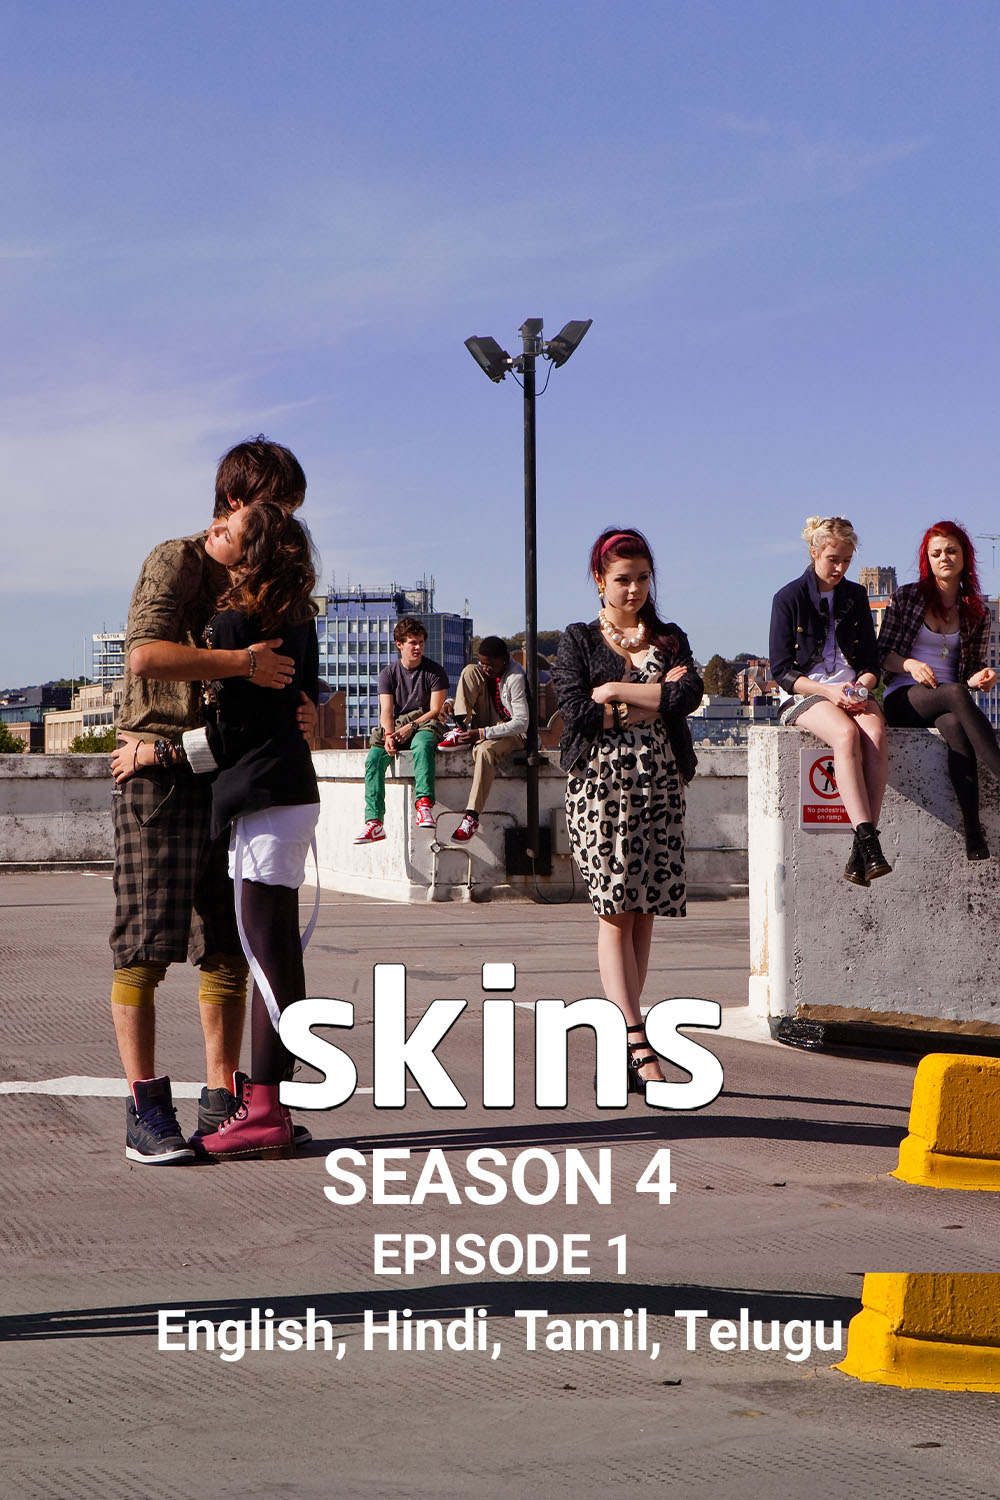 Skins: Series 1  Where to watch streaming and online in New